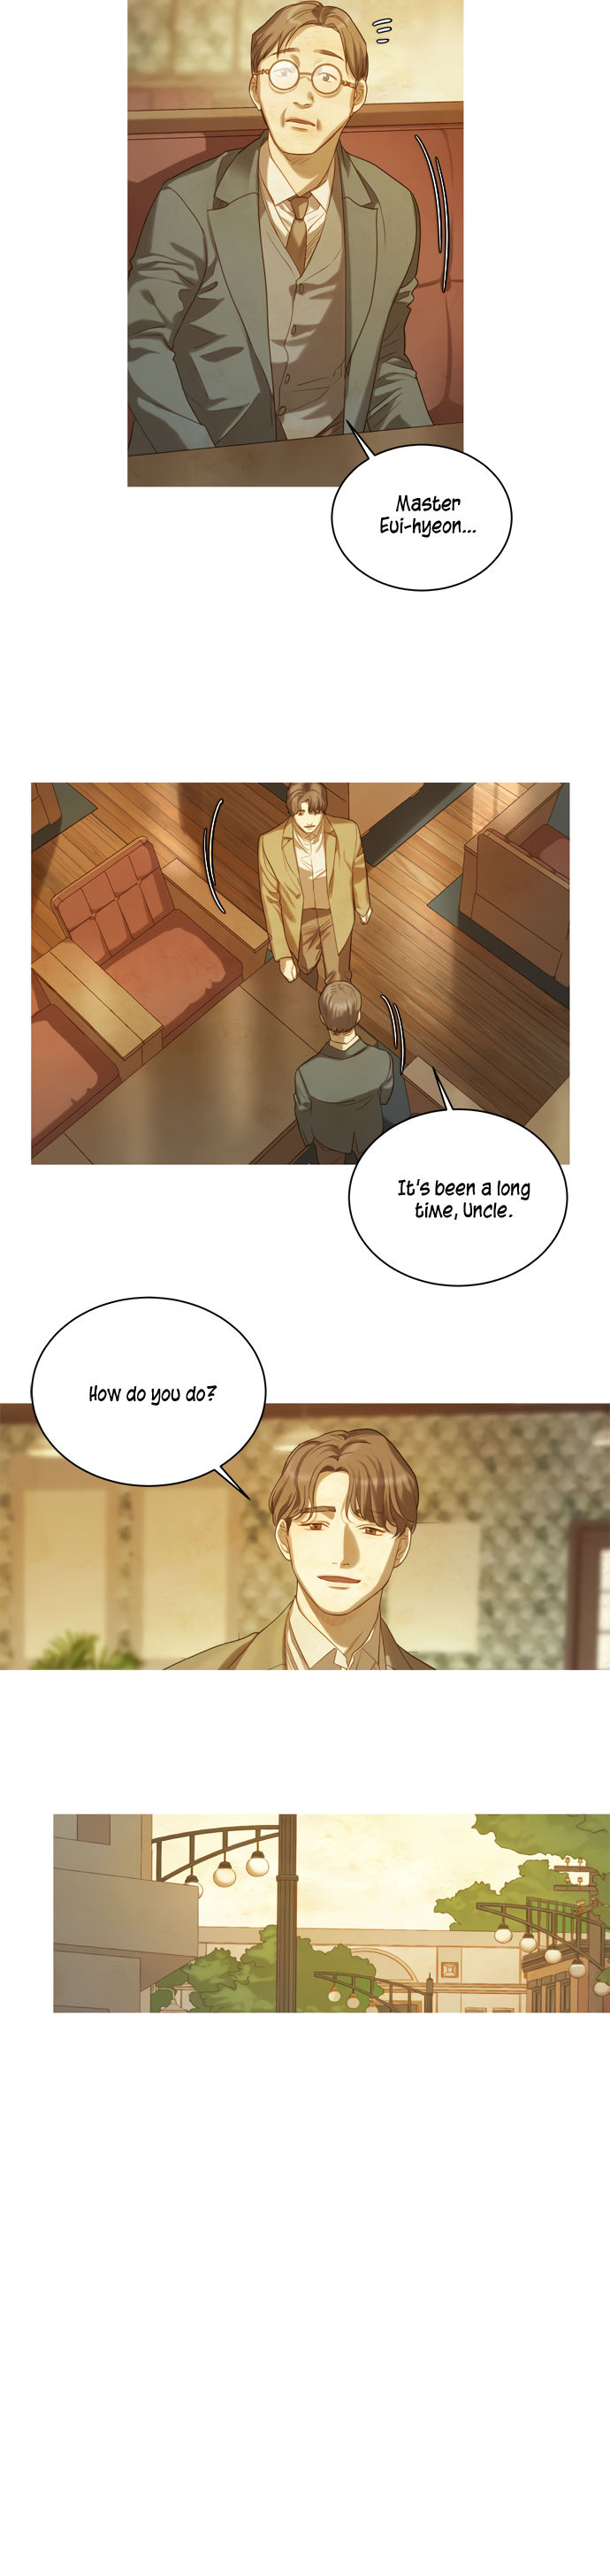 Gorae Byul - The Gyeongseong Mermaid - Chapter 16 Page 17